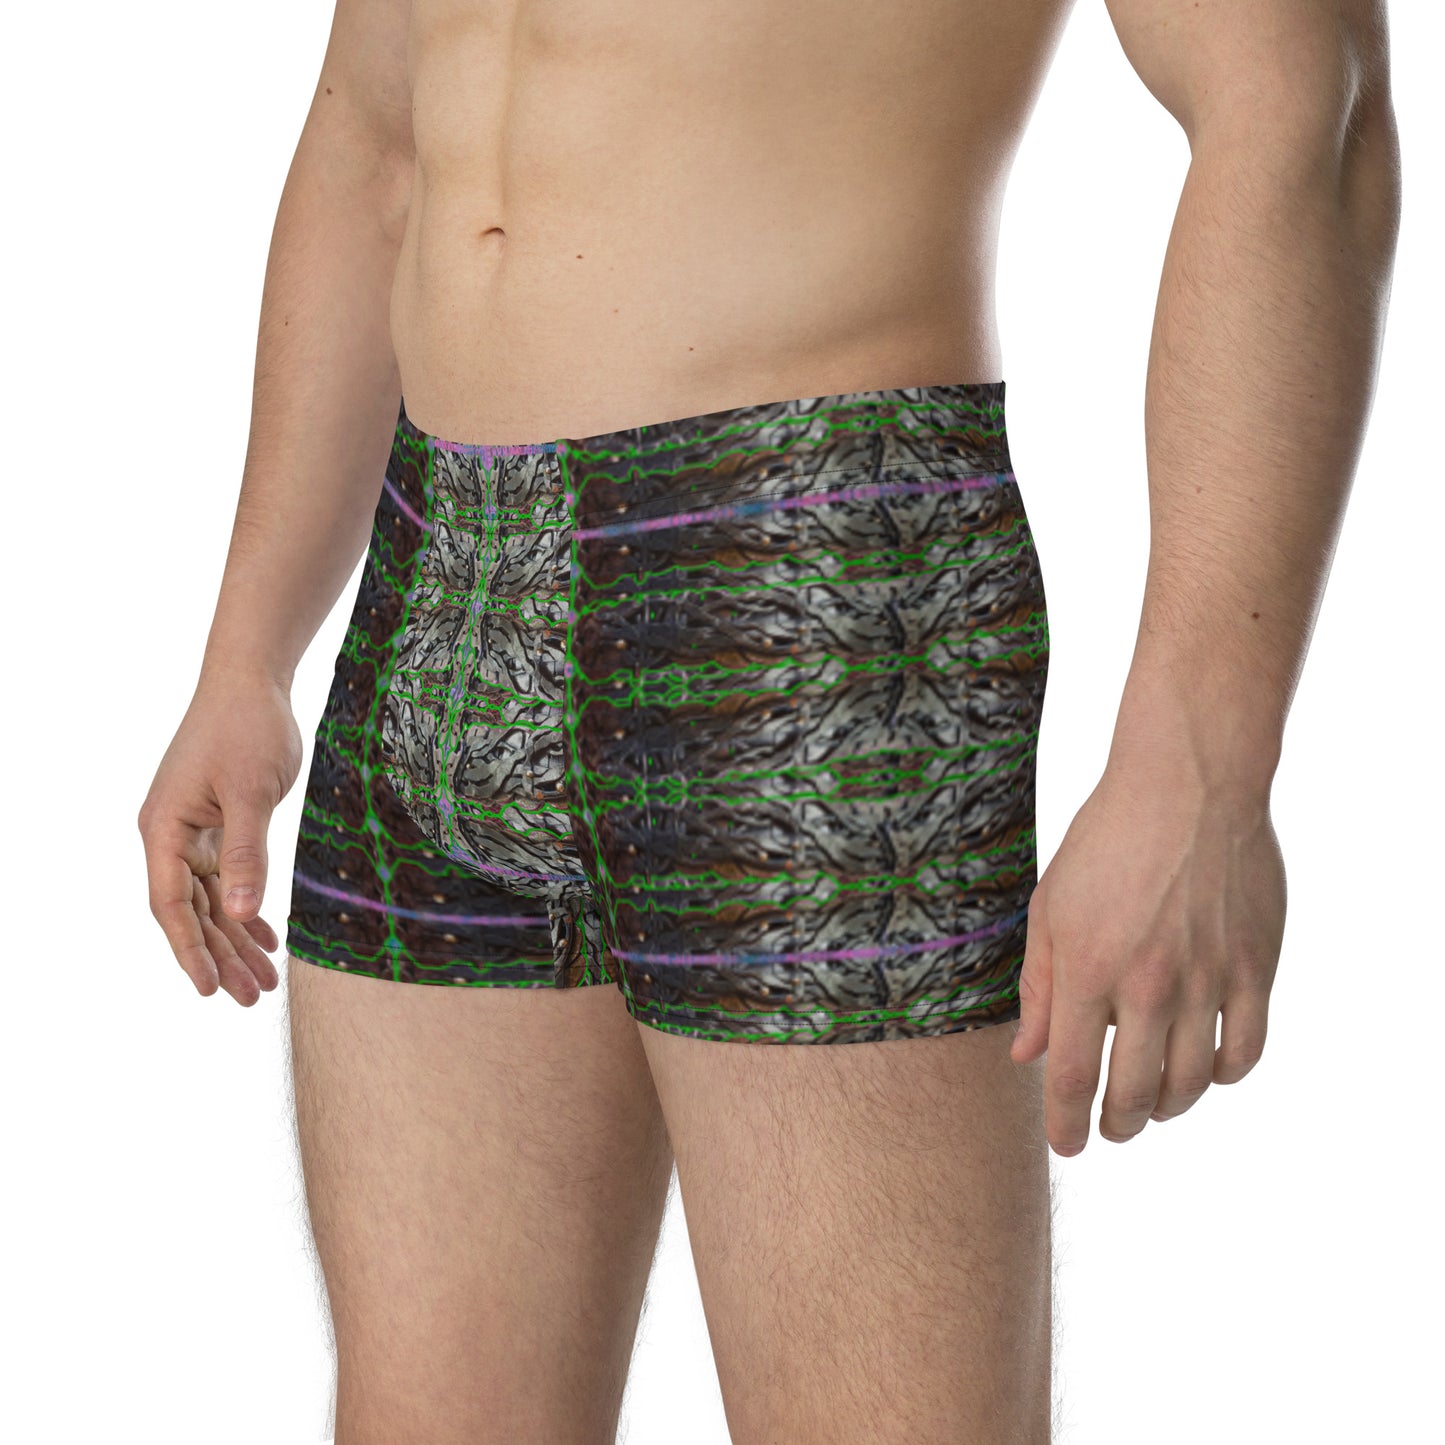 Boxer Briefs (His/They)(Rind#5 Tree Link) RJSTH@Fabric#5 RJSTHW2021 RJS